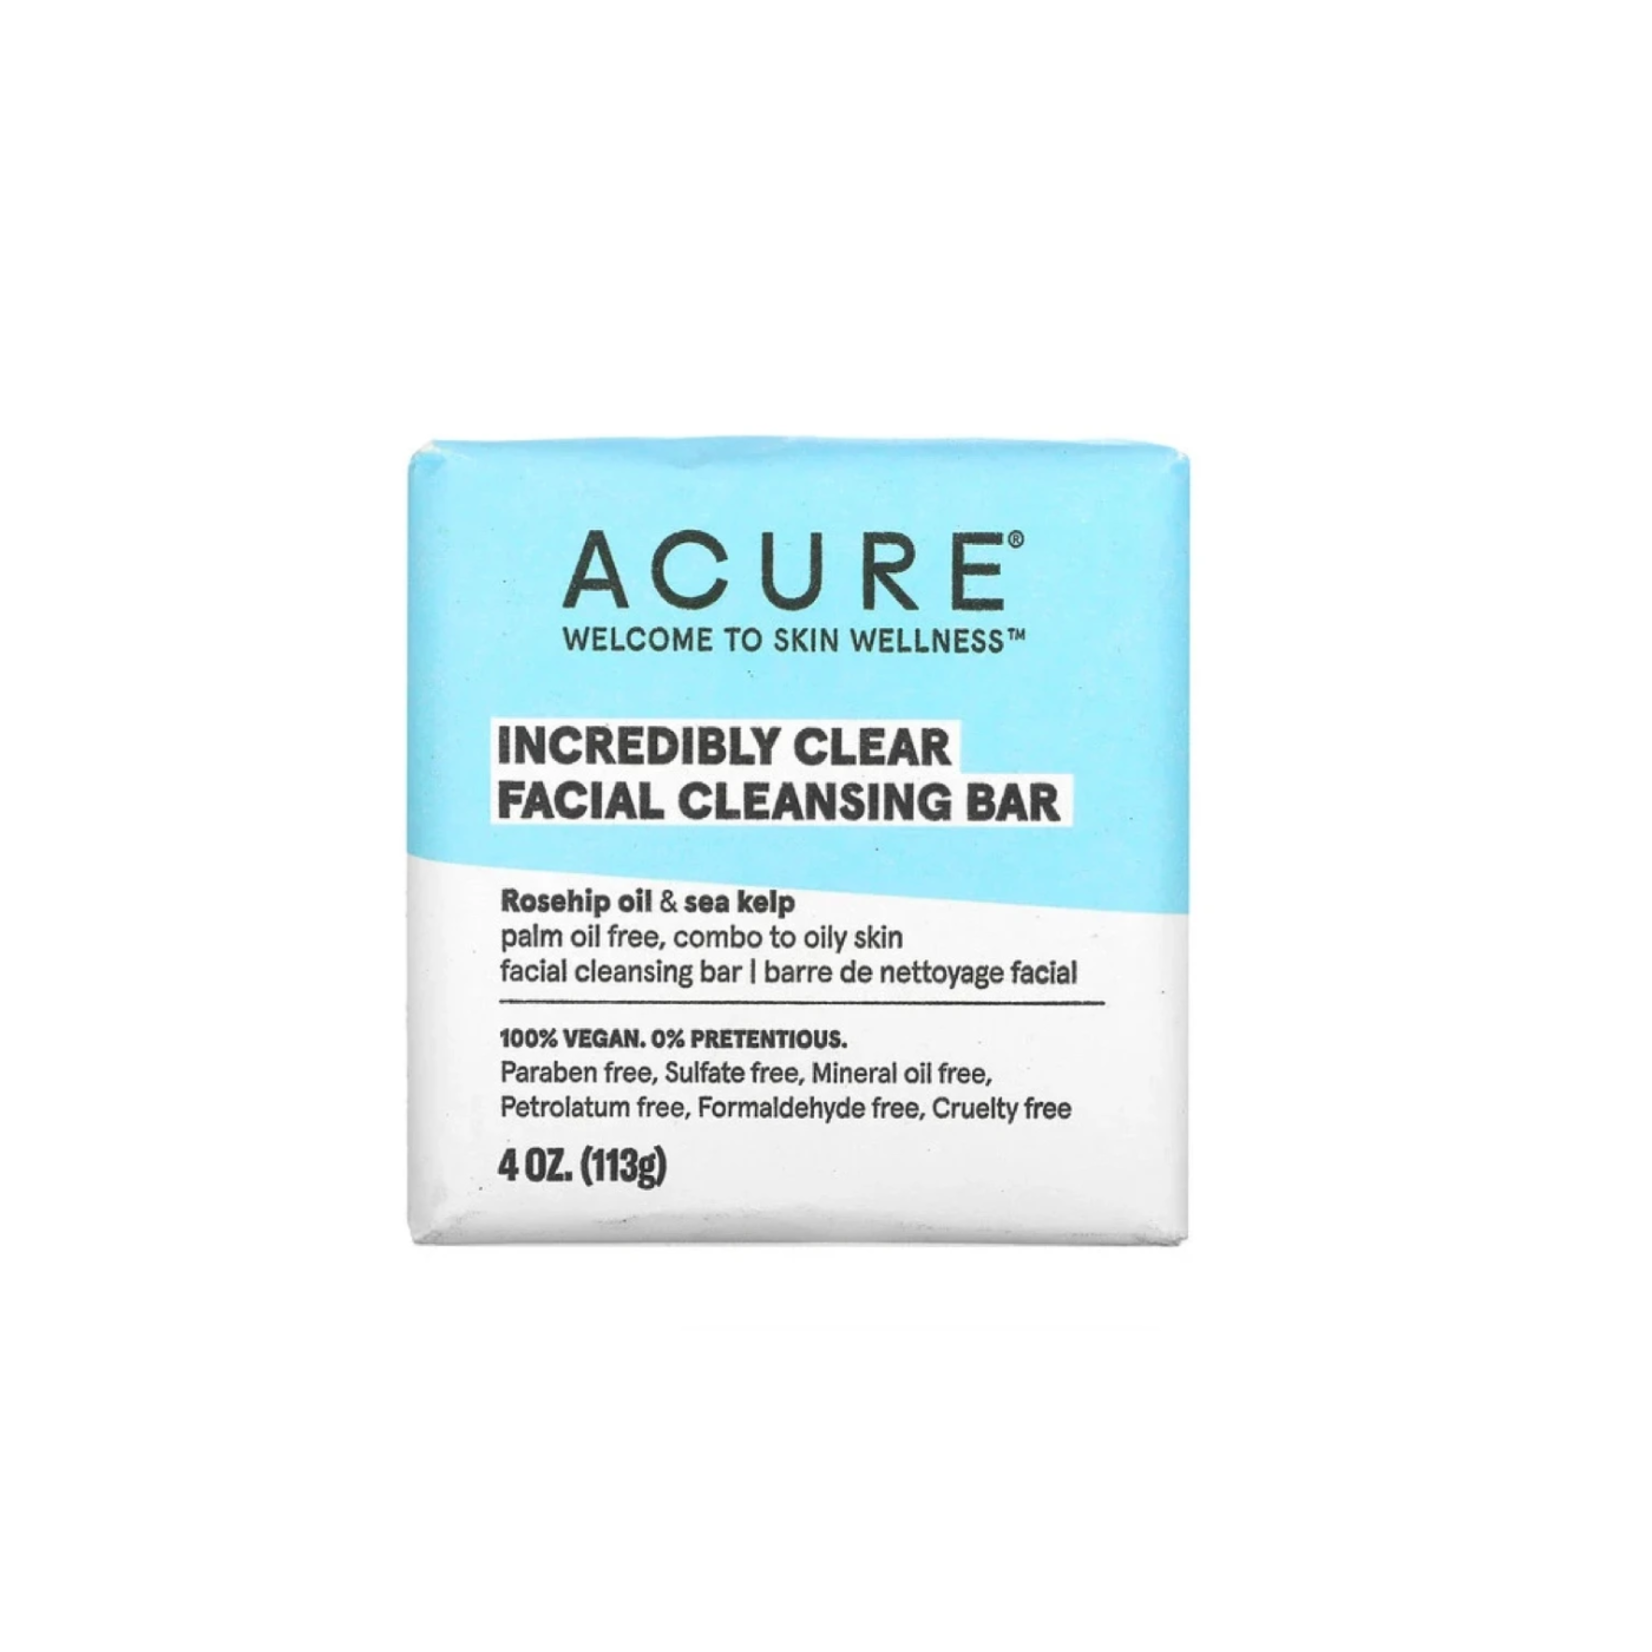 Acure Acure Incredibly Clear Facial Cleansing Bar 113g